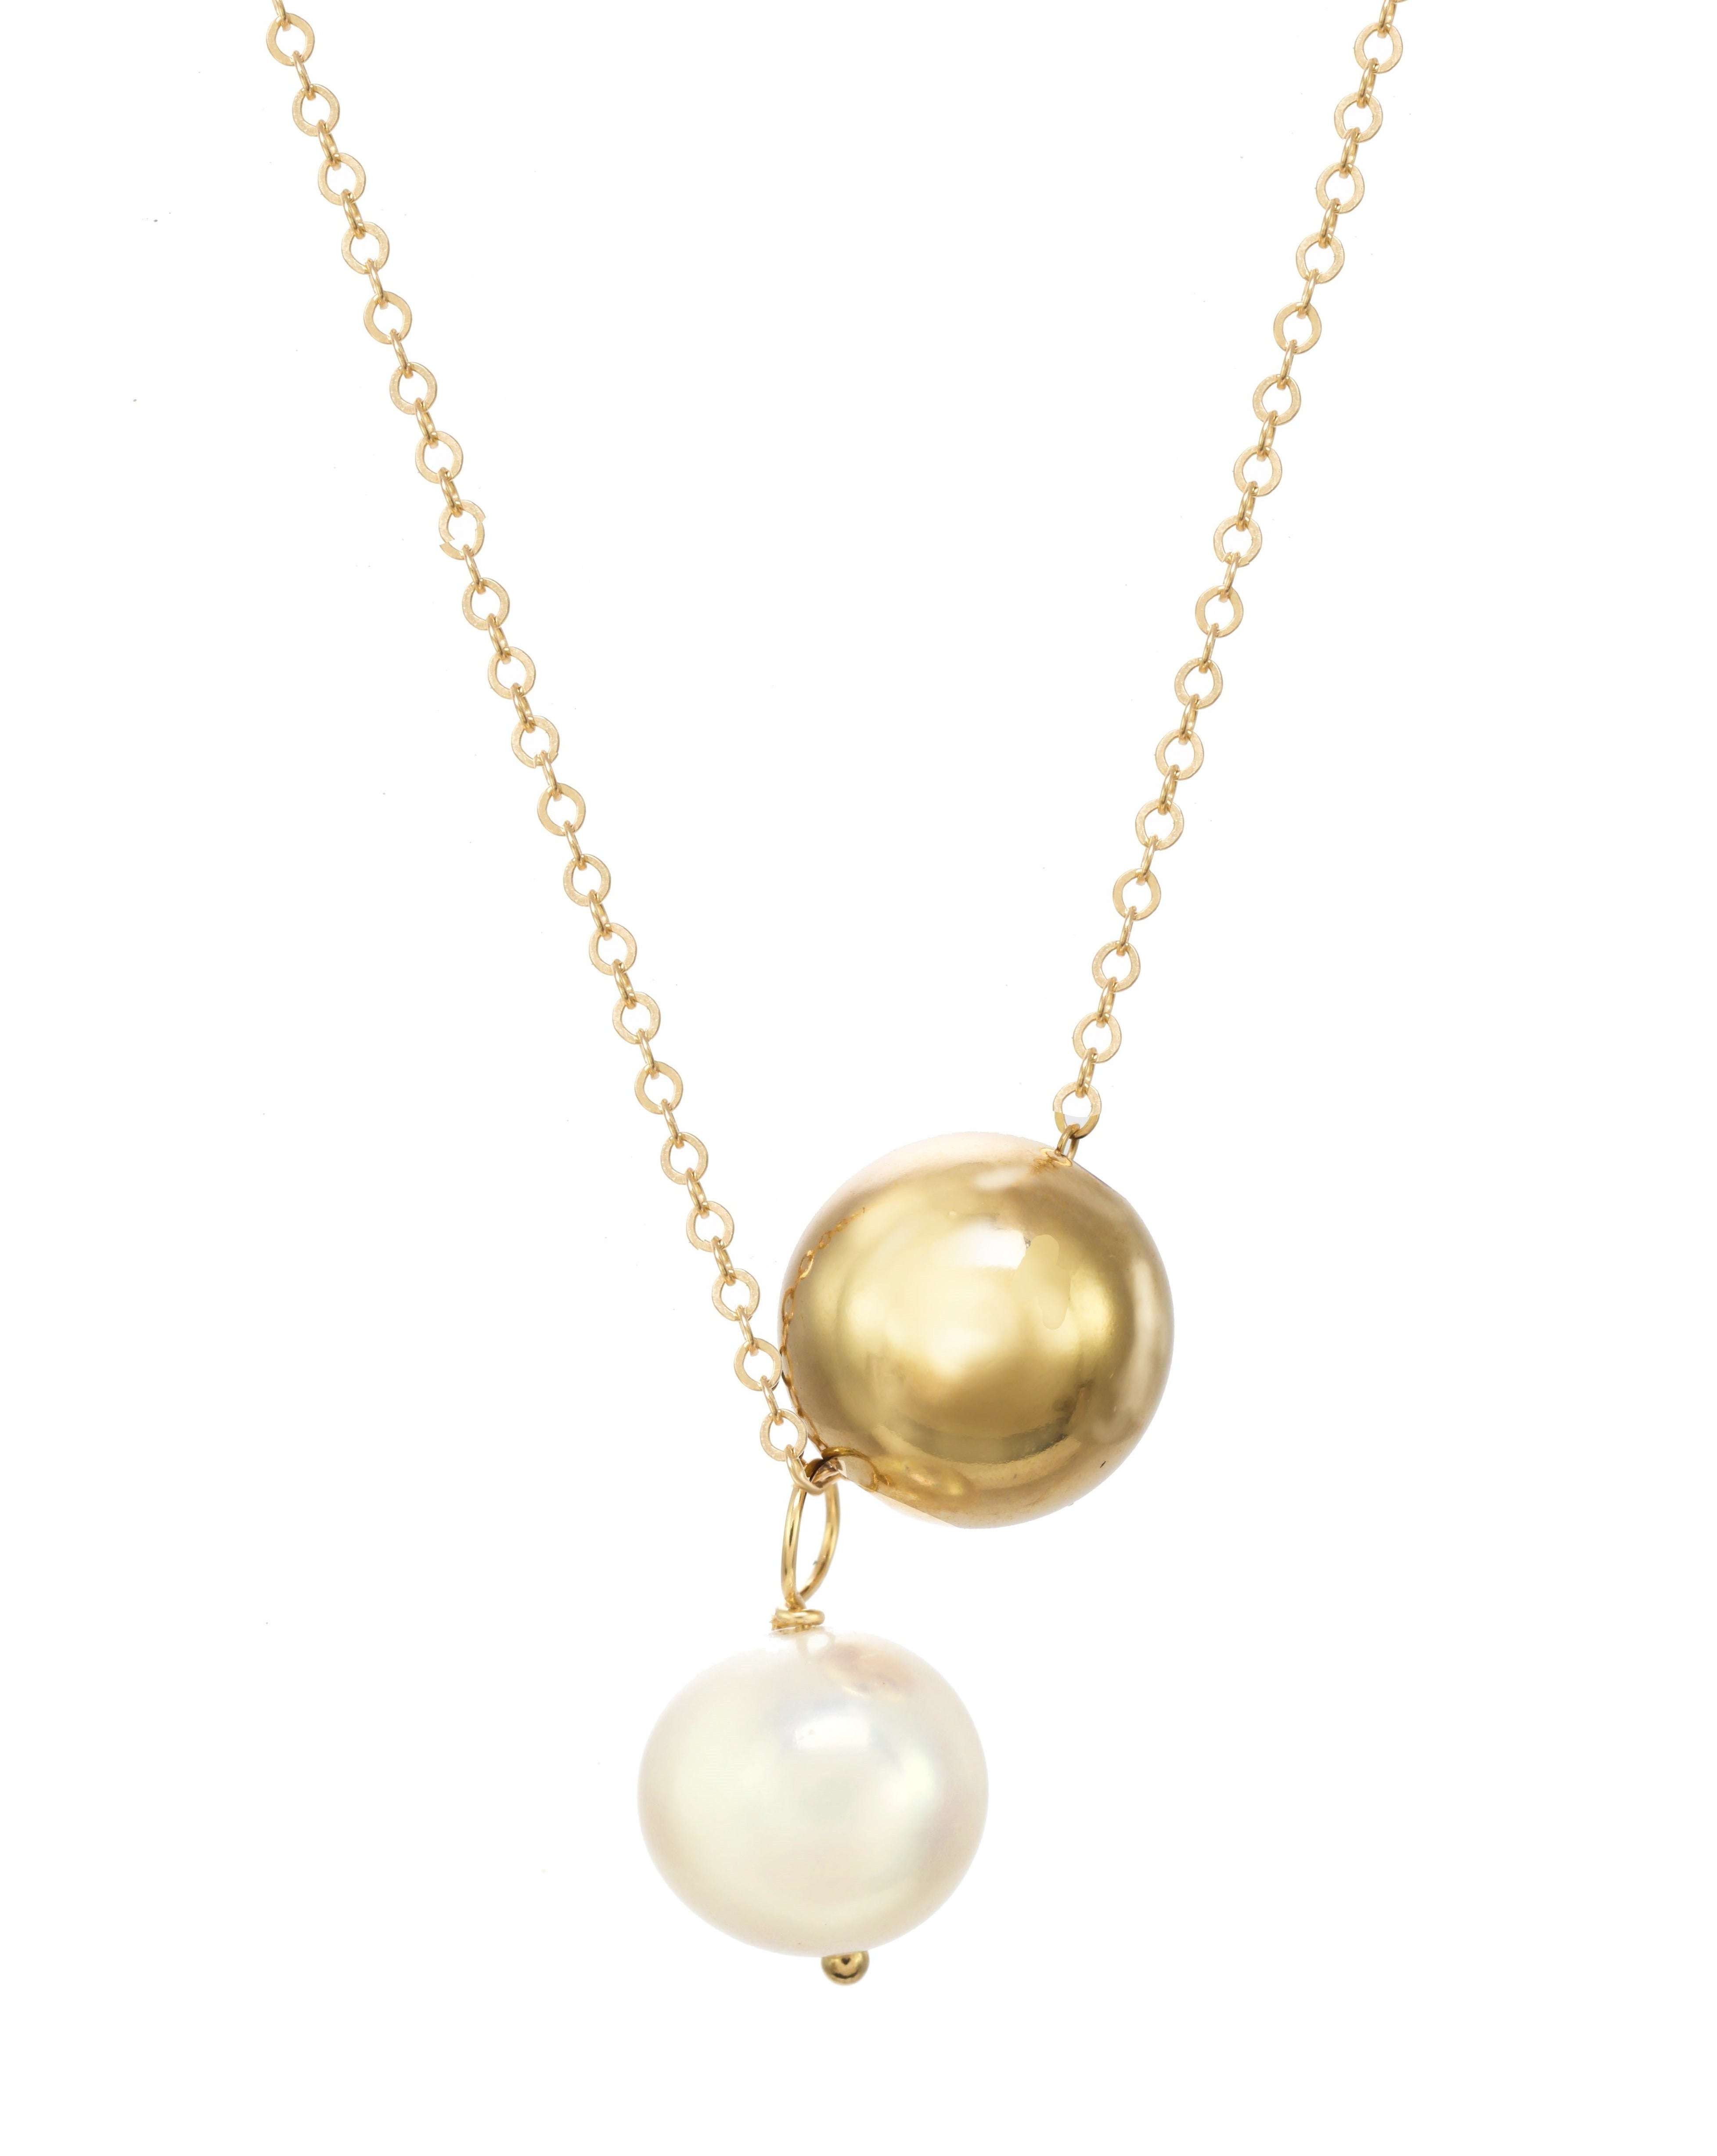 Lark Necklace by KOZAKH. A 16 to 18 inch adjustable length necklace, crafted in 14K Gold Filled, featuring an 8mm white freshwater pearl and a seamless gold bead.